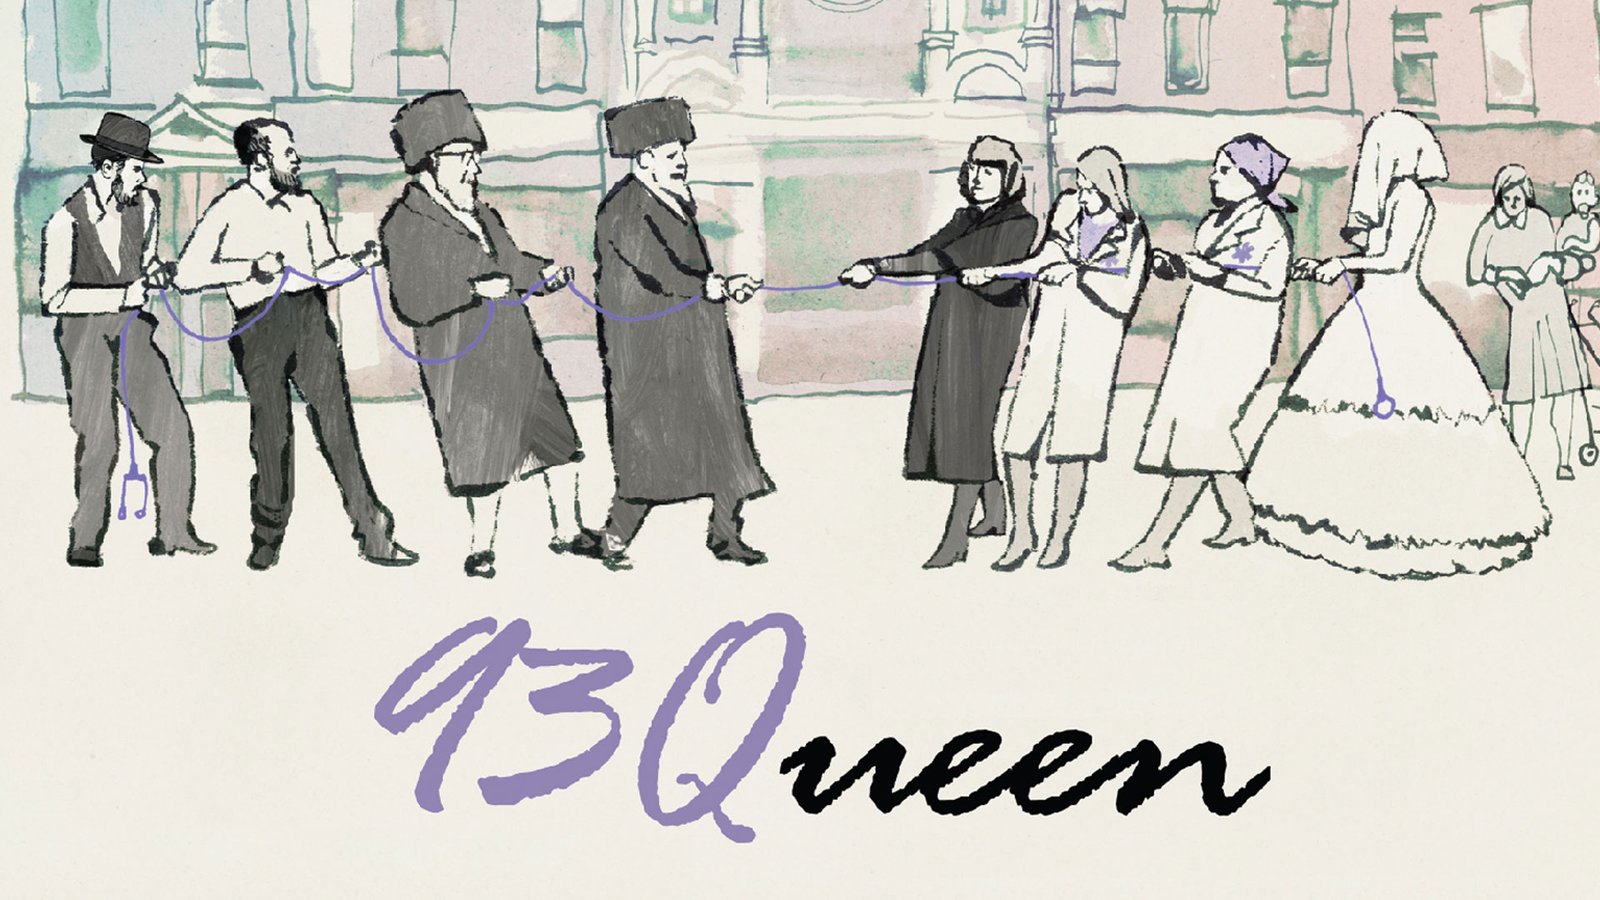 93Queen - The Creation of the First All-Female Hasidic Ambulance Corps in New York City